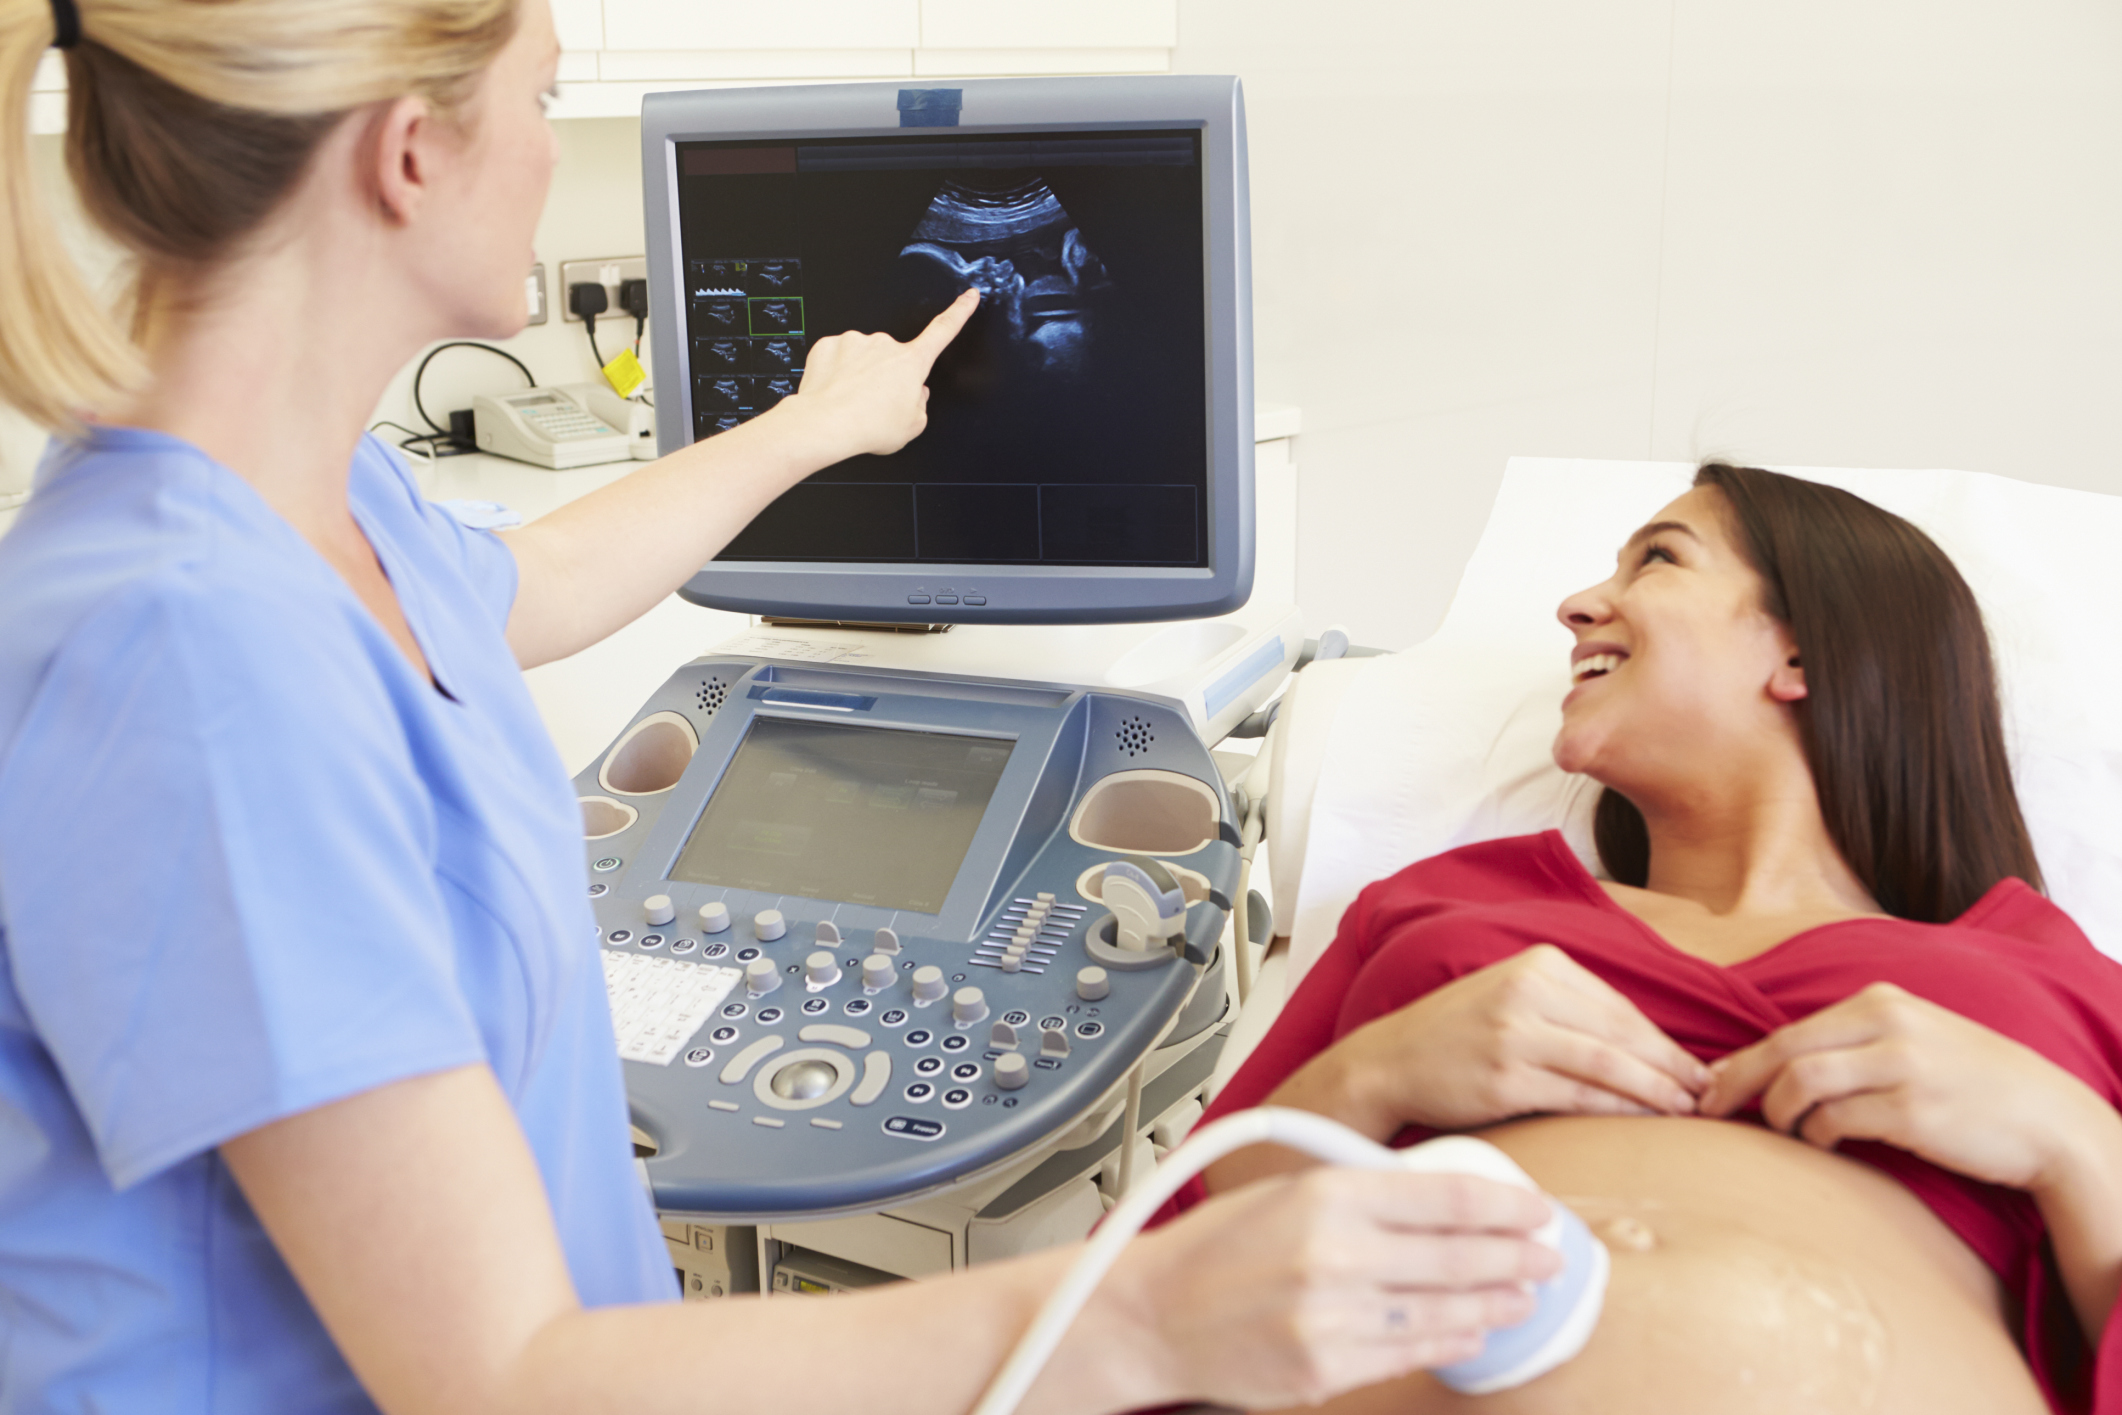 Learn about the ultrasound scanning process